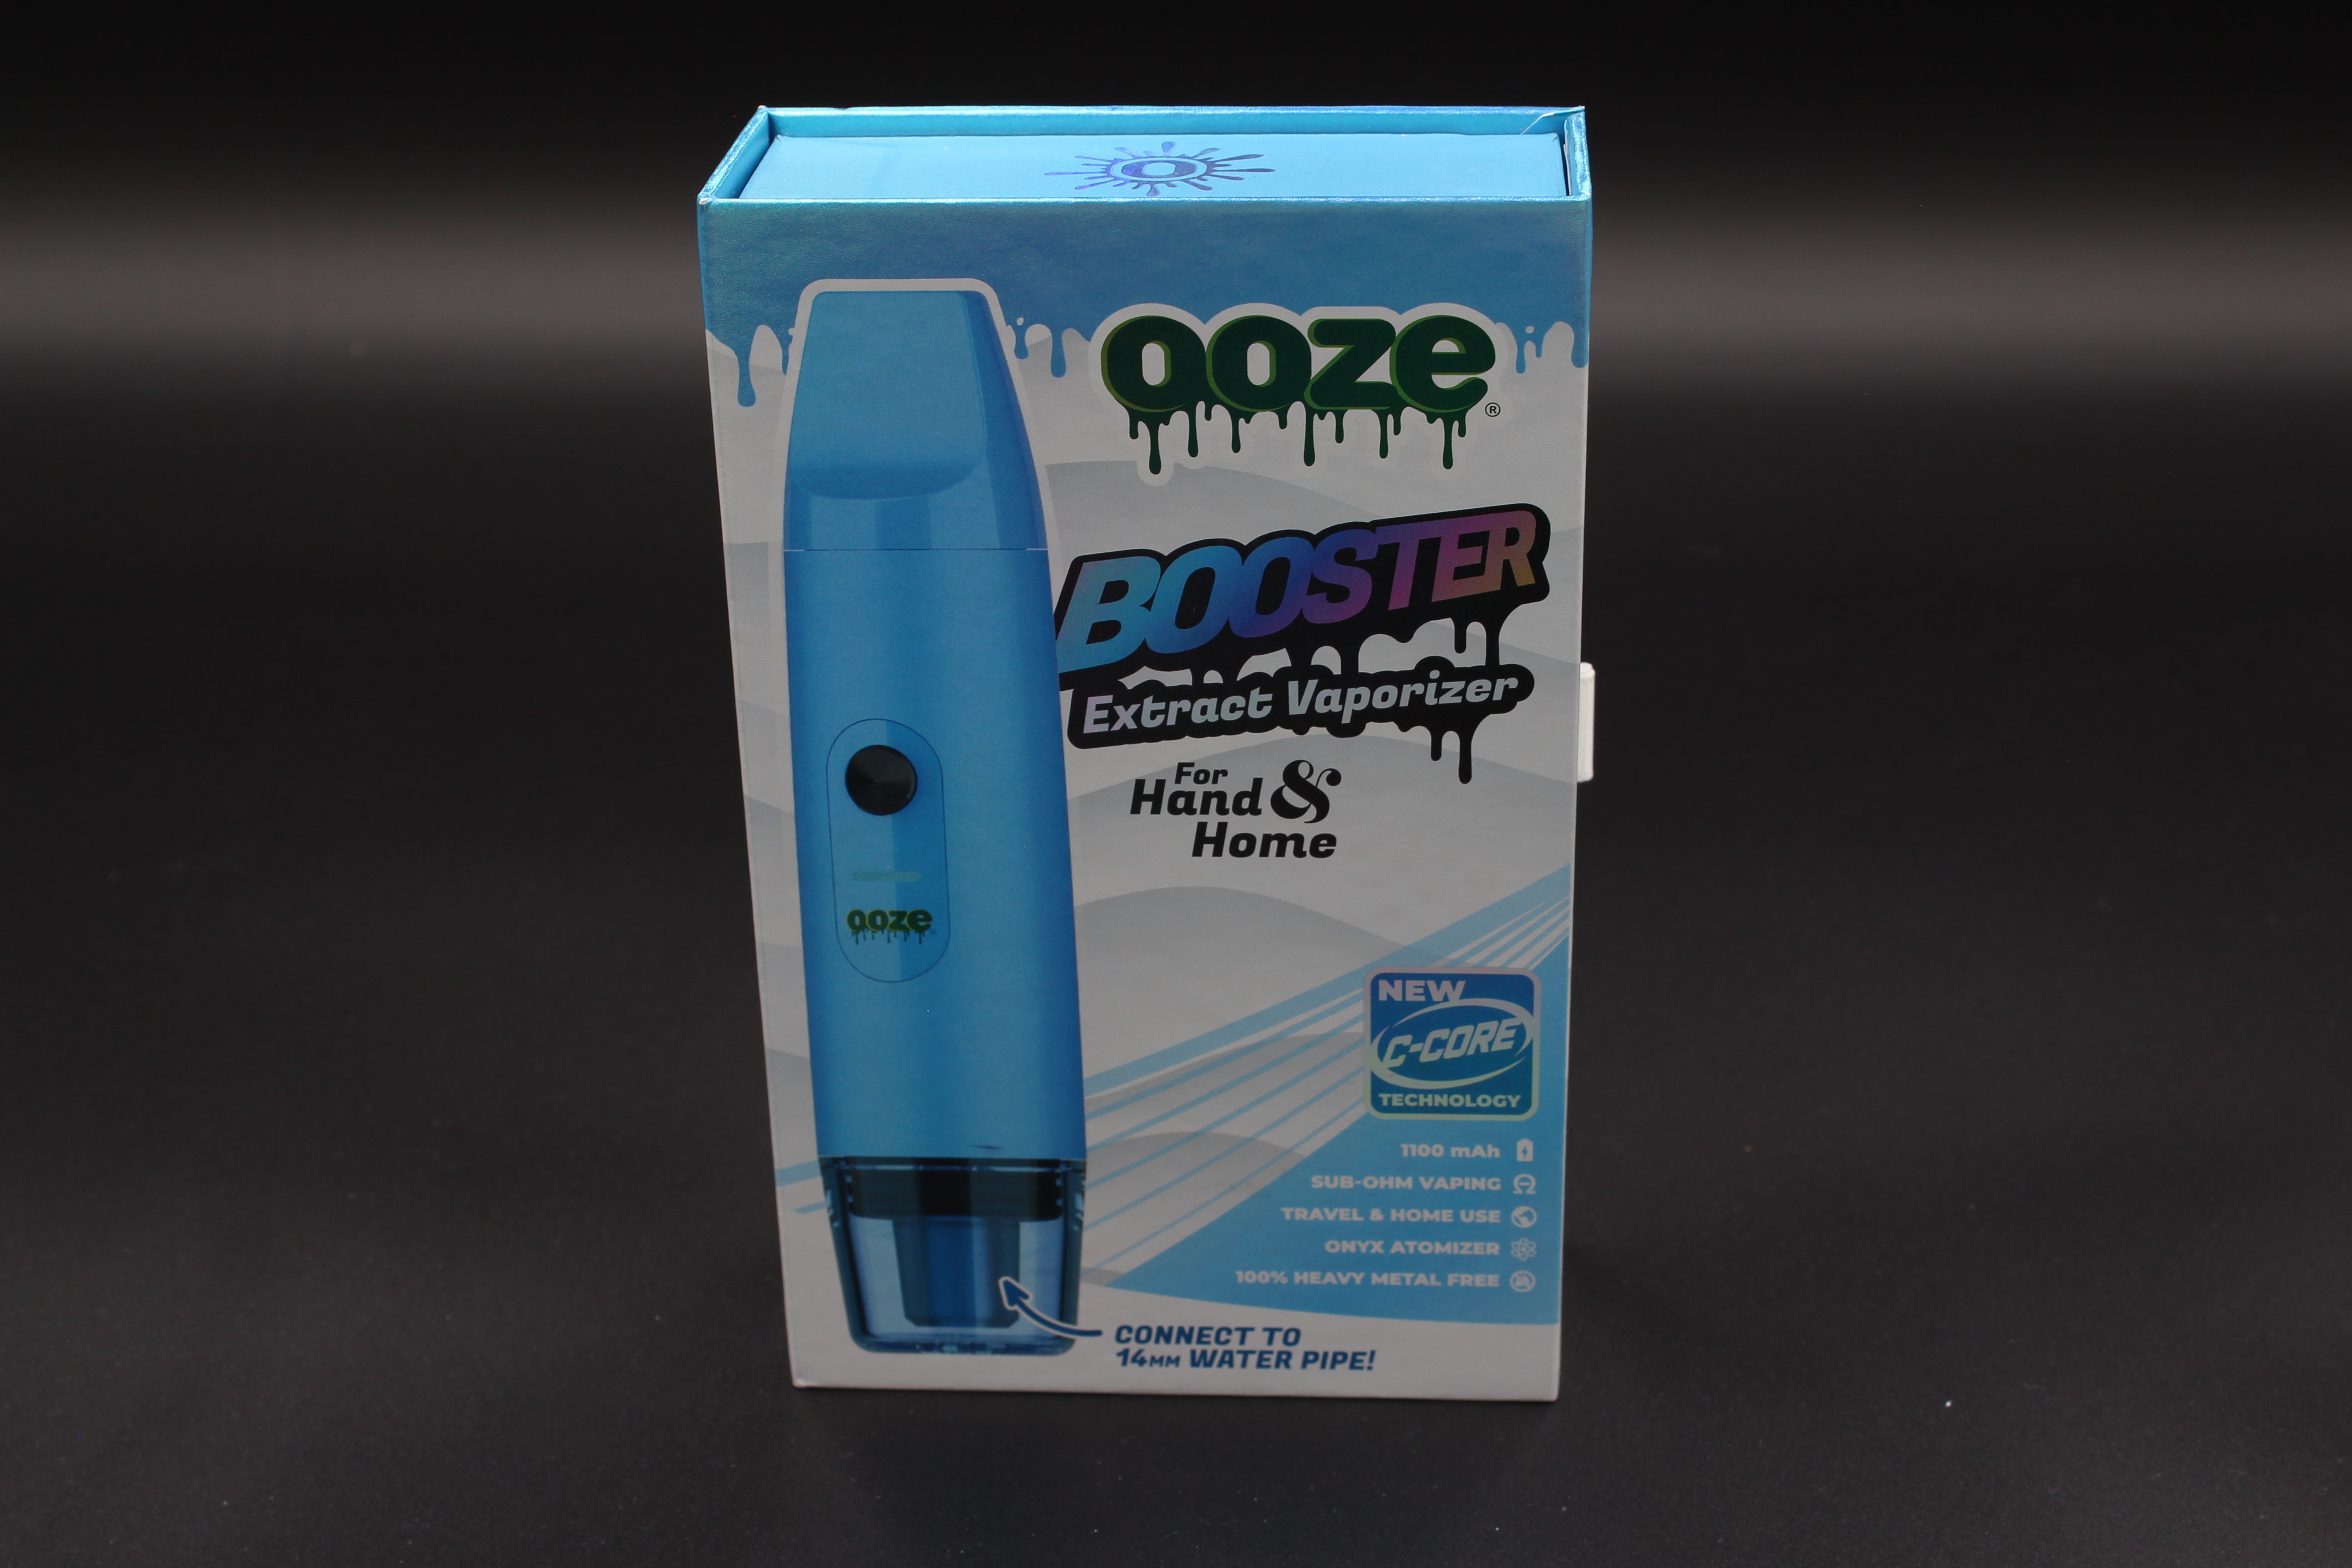 Ooze Booster Extract Vaporizer - Blue front box